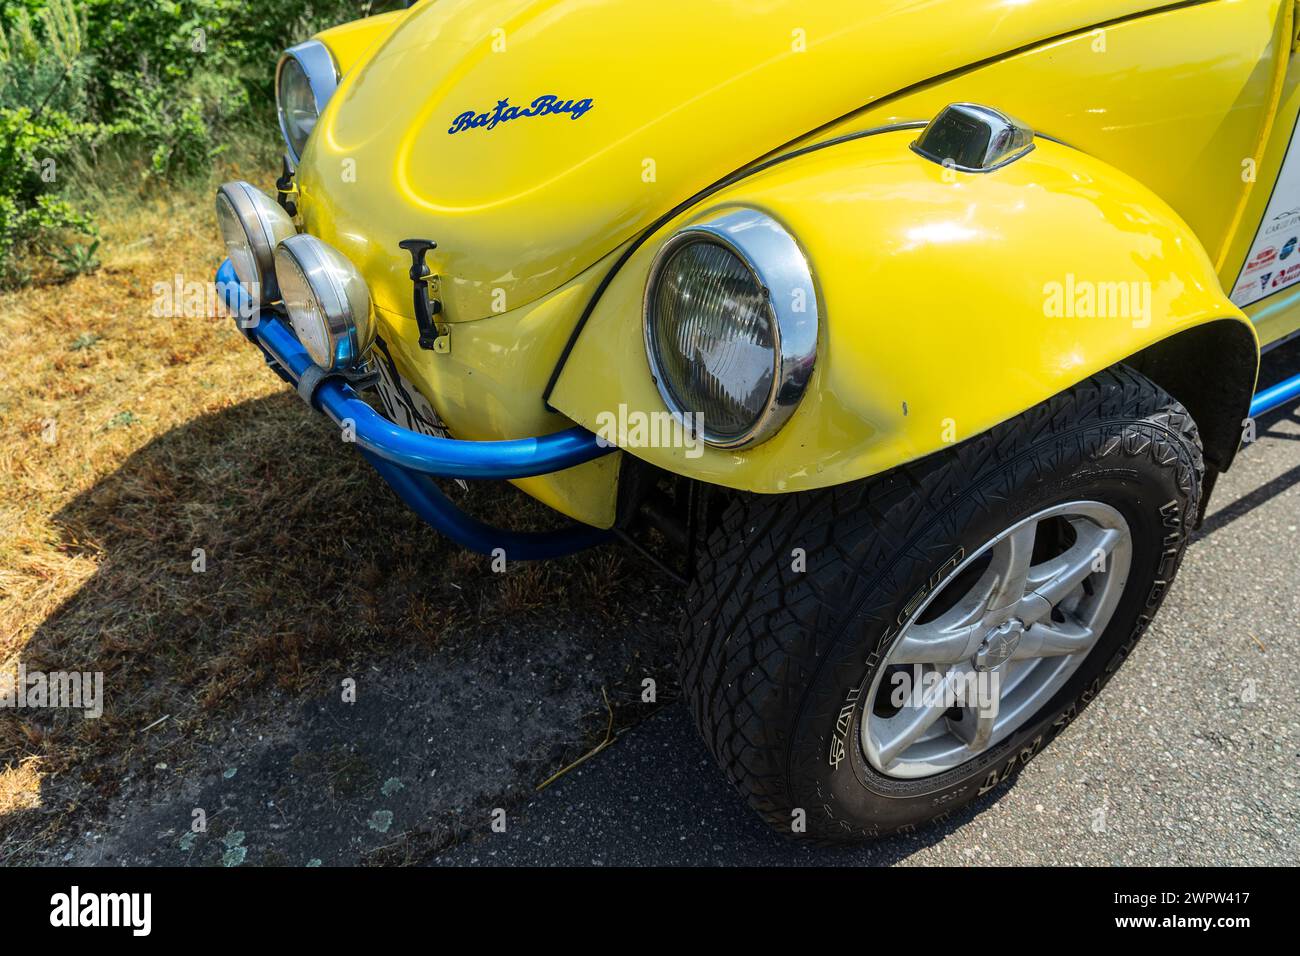 LINTHE, GERMANY - MAY 27, 2023: The fragment of Baja Bug is an original Volkswagen Beetle modified to operate off-road. Die Oldtimer Show 2023. Stock Photo